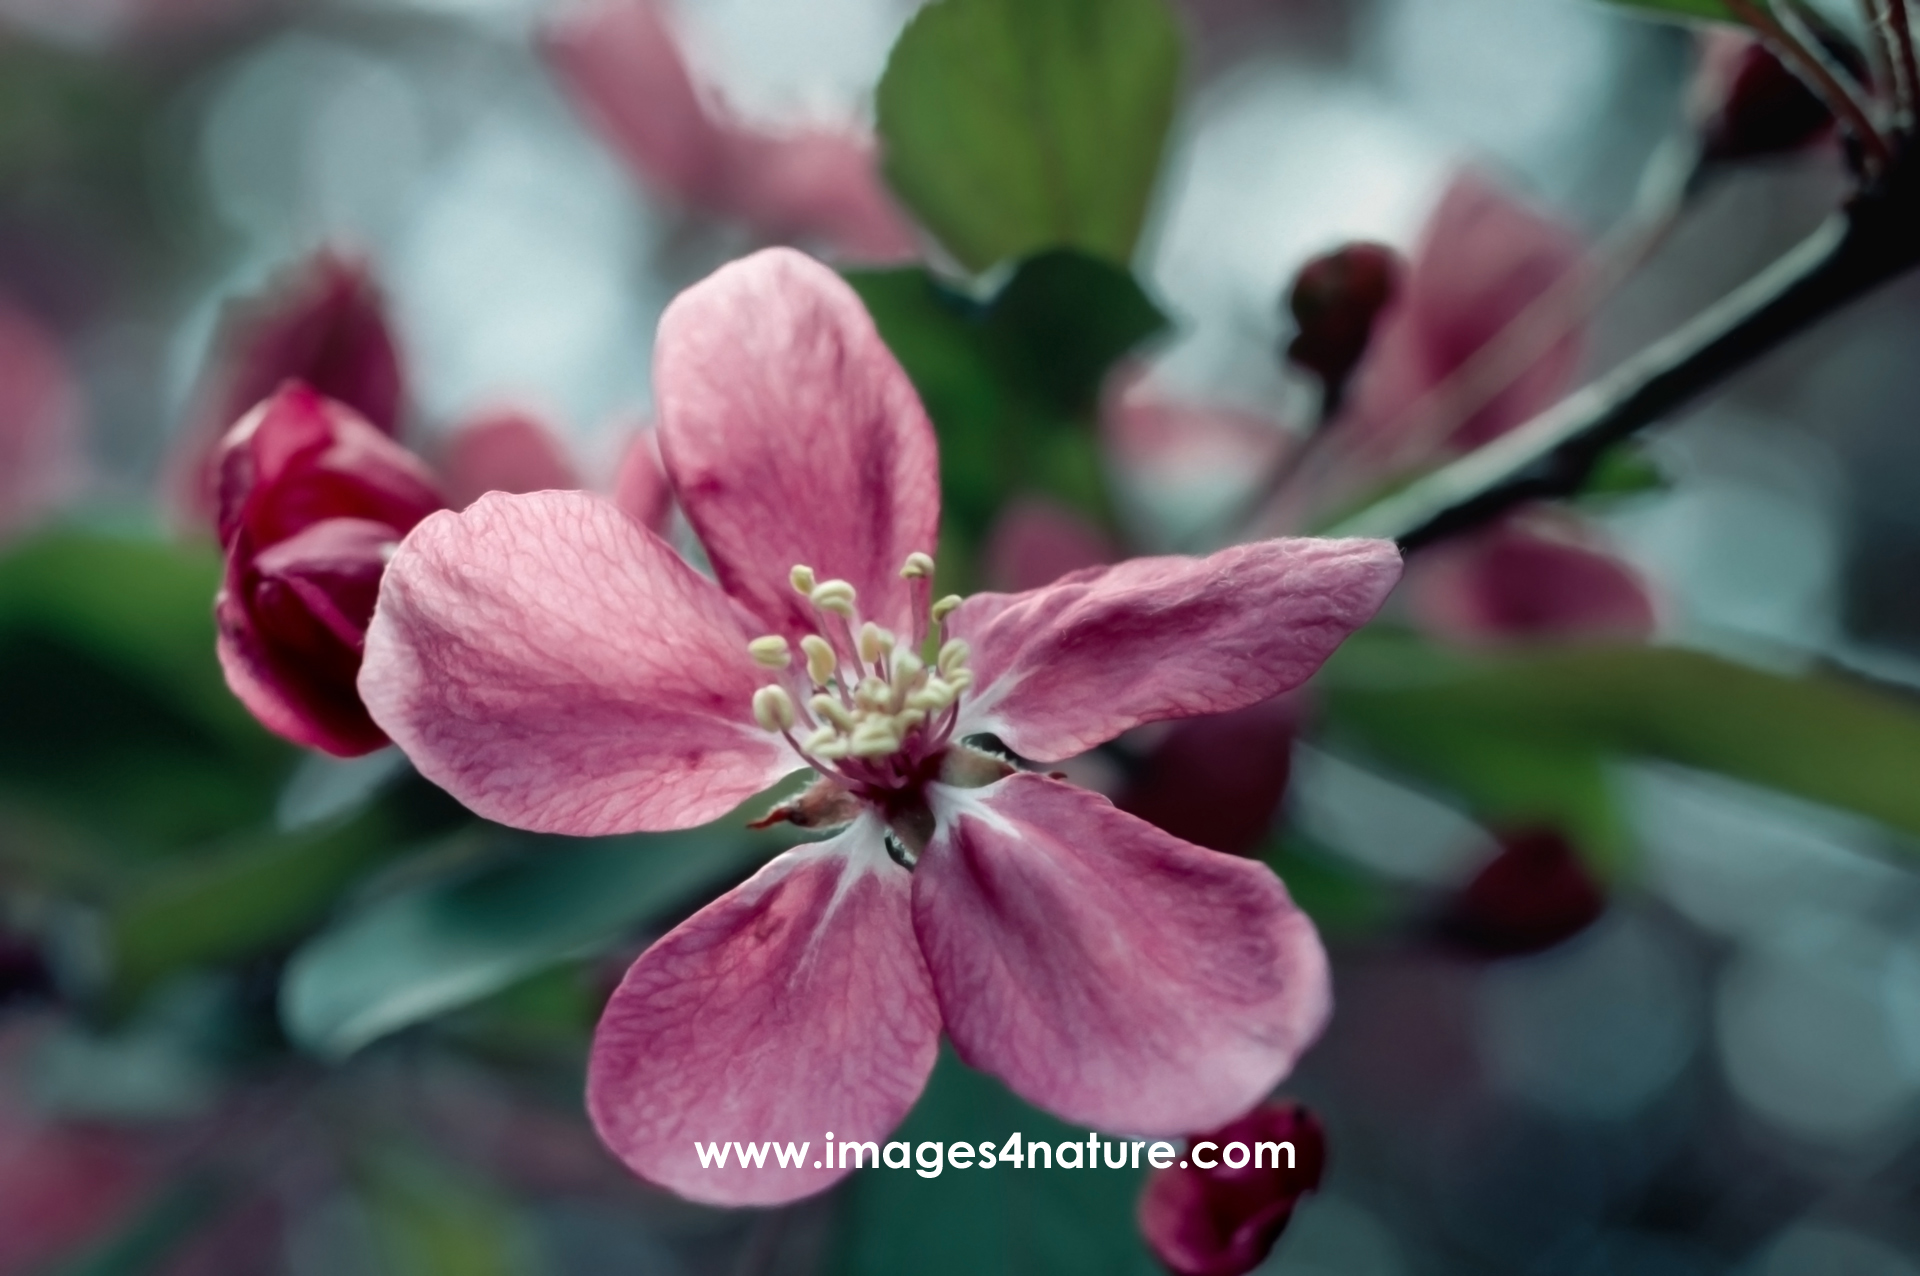 Close-up of red apple tree blossom in springtime